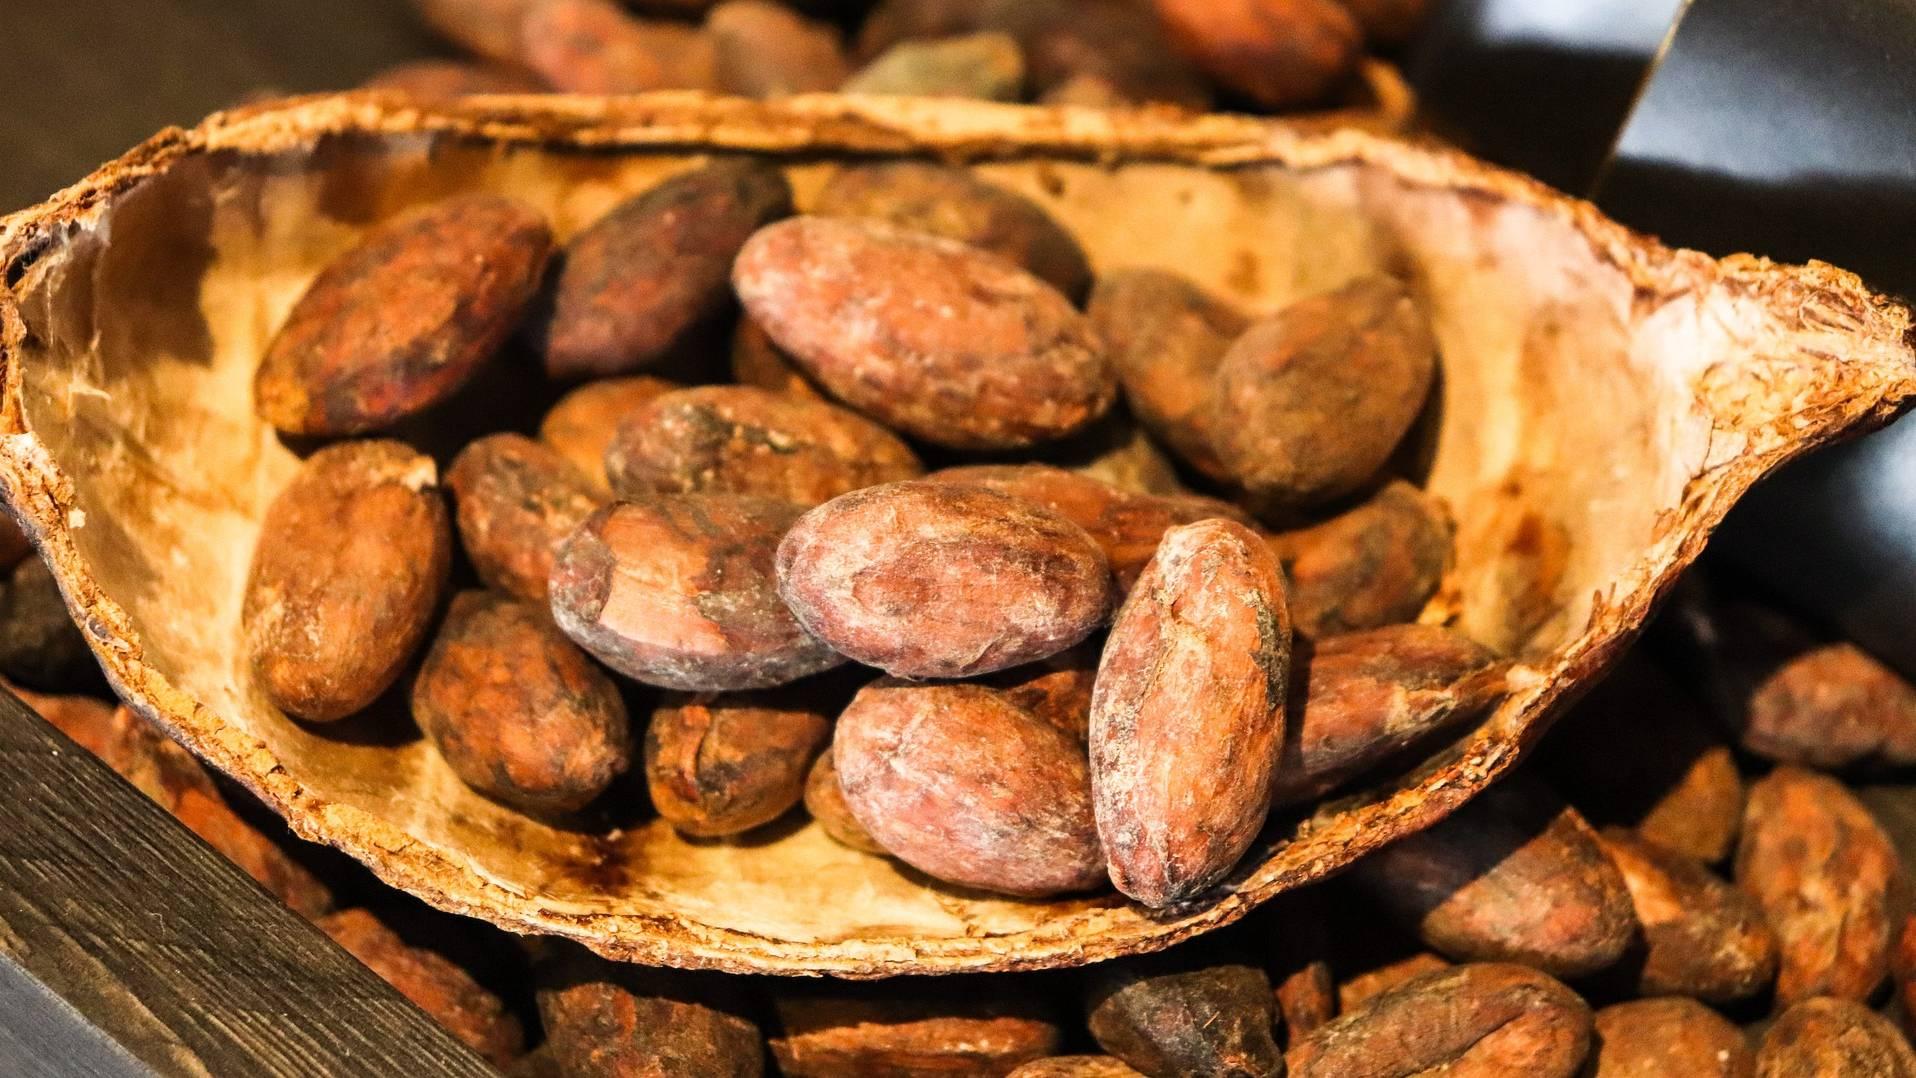 Dust containing lead can settle on cacao beans as they ferment and dry outdoors. (Allybally4b / Pixabay)